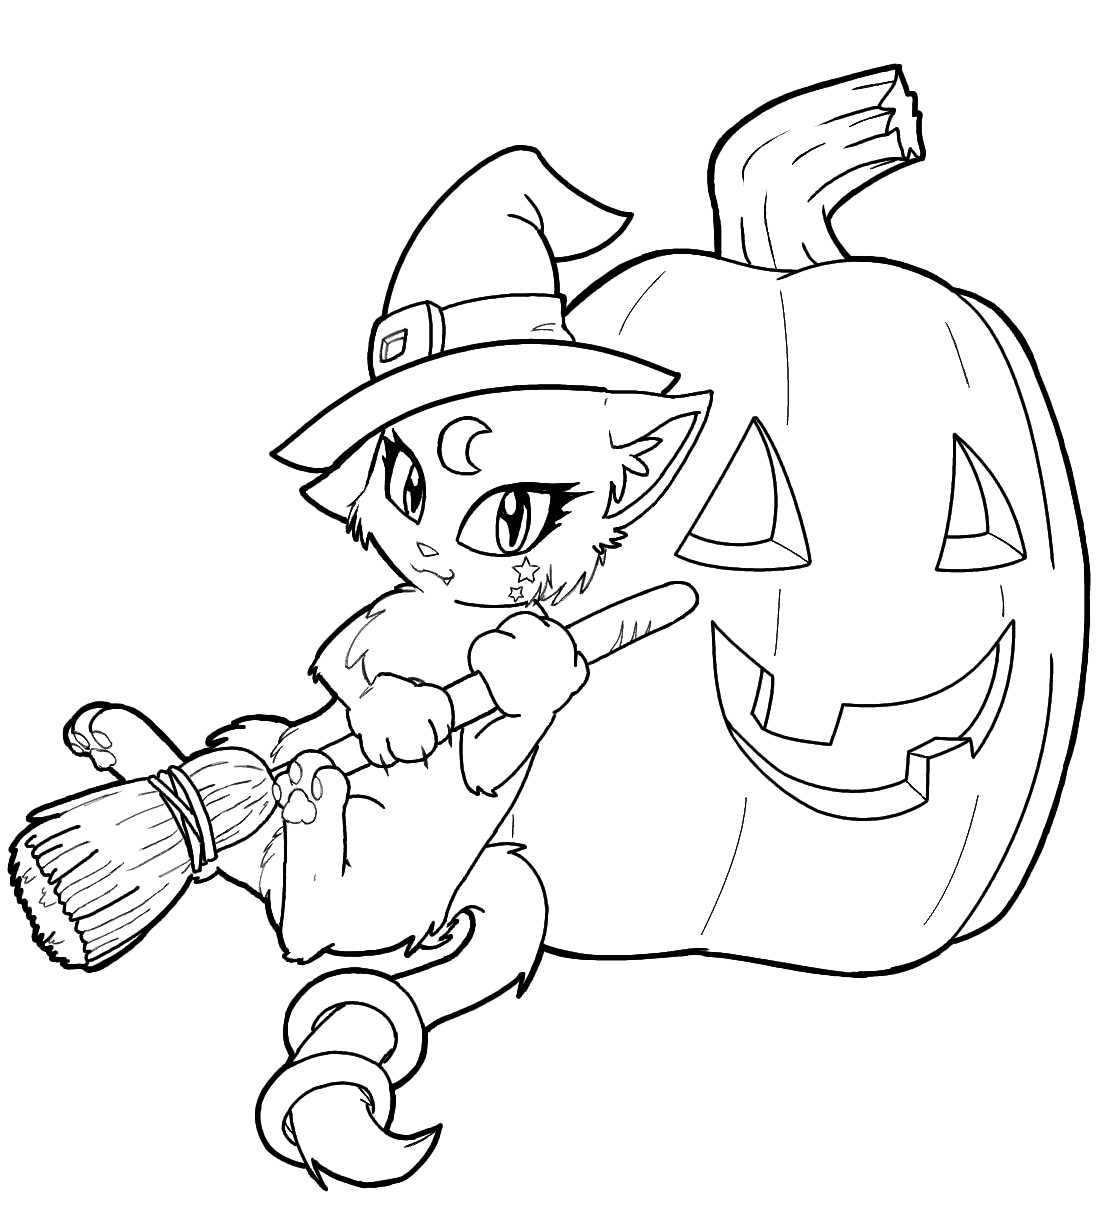 Witch Coloring Page For Kids Free Printable Witch Coloring Pages
Drawing Kids Anime Witches Wicked Face Color Evil Scarlet Halloween
Templates Printable Female Christmas Drawings Cool2bkids Template